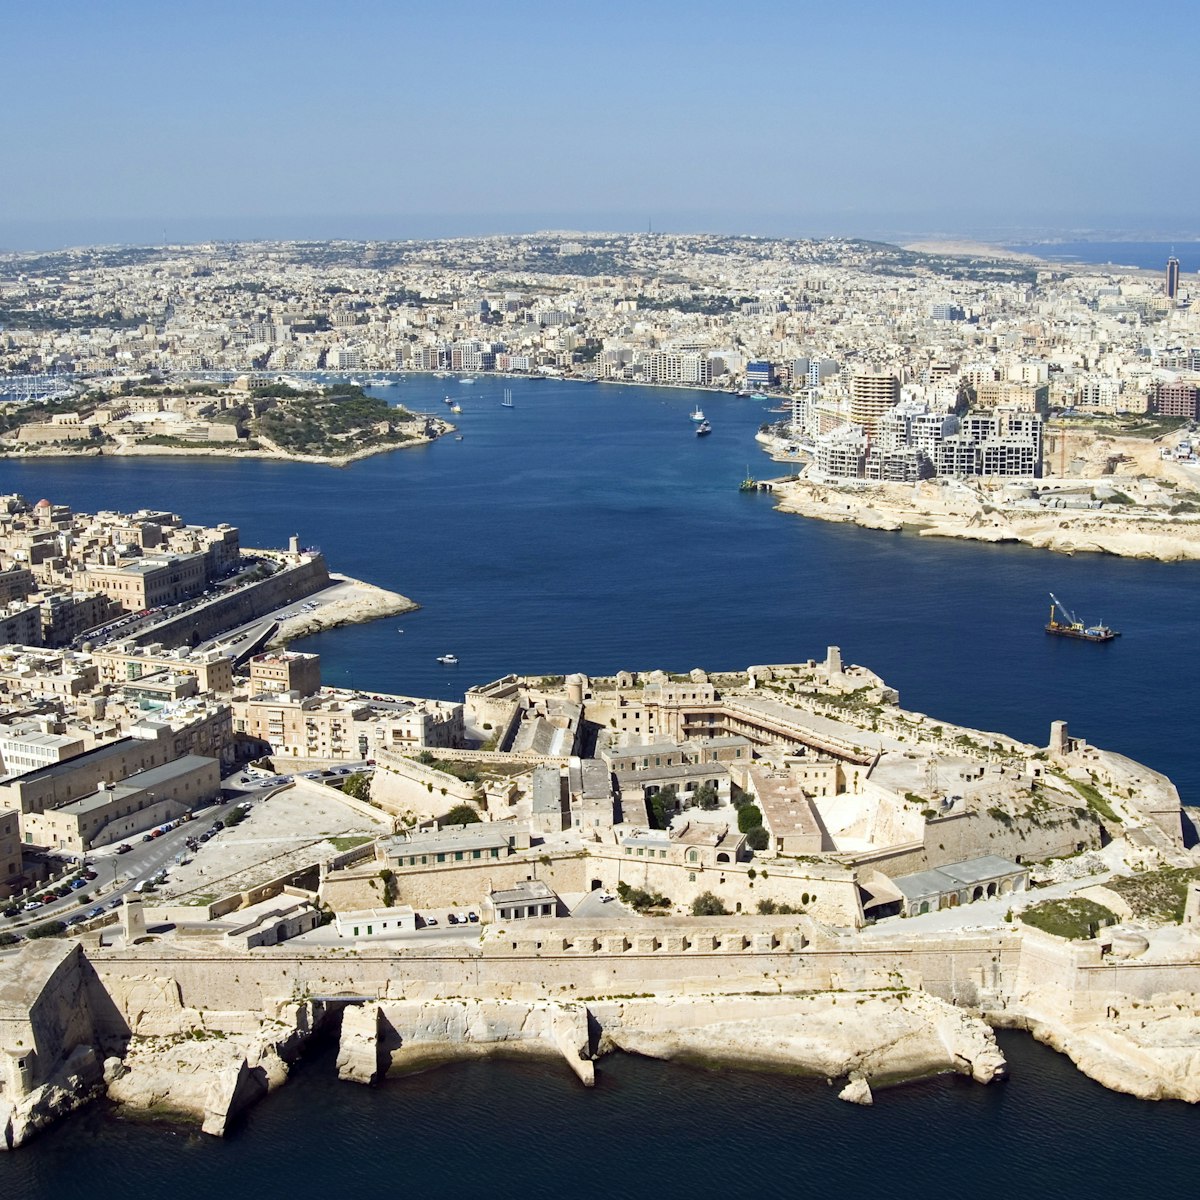 Aerial view of Valletta and St. Elmo Fort, Manoel Island, and Dragutt Point on the right, Malta, Mediterranean, Europe